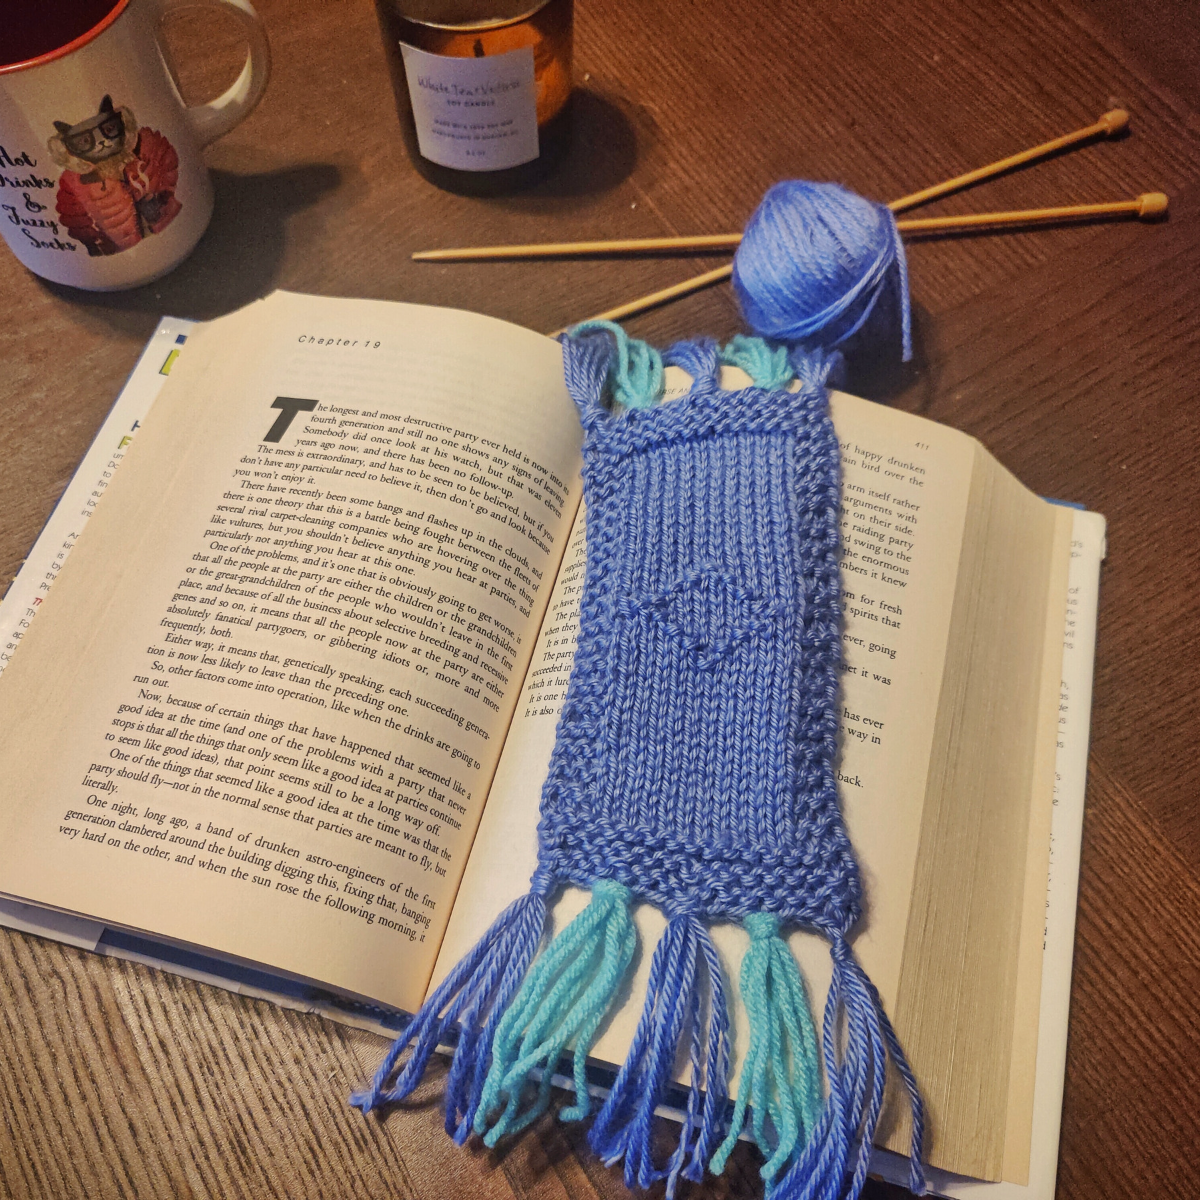 Colorful knitted bookmark made from leftover yarn